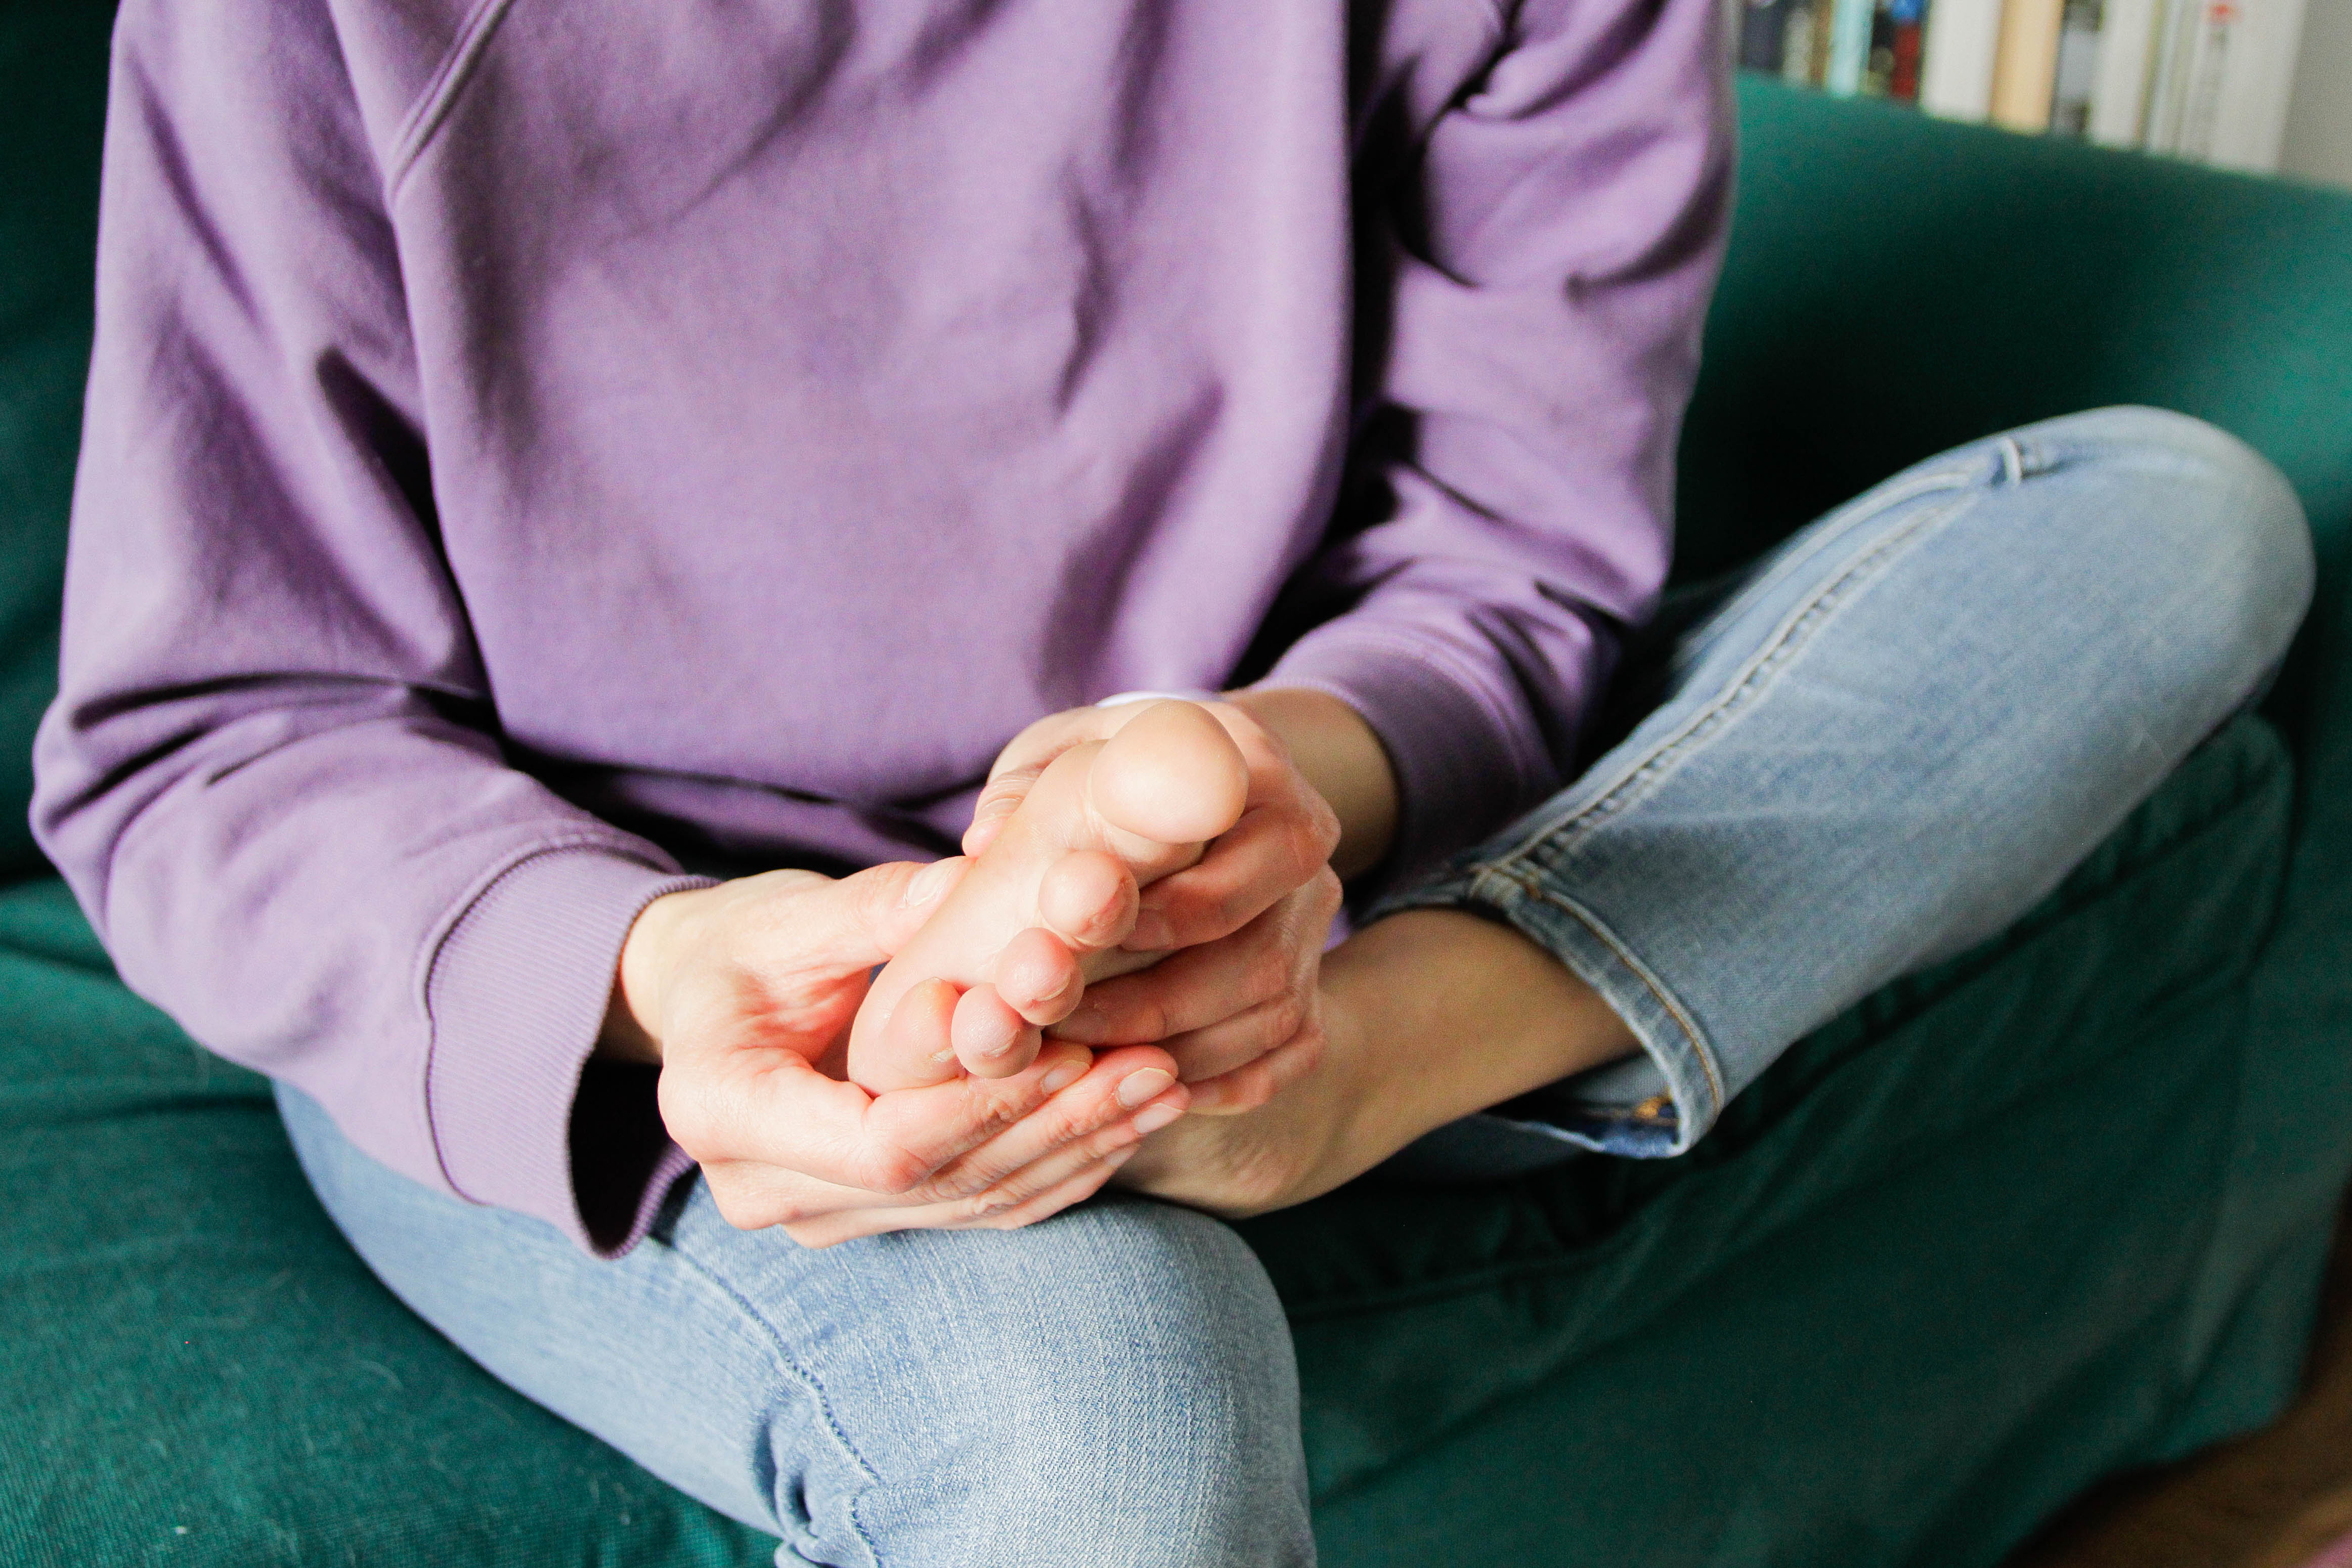 Person sitting cross-legged on a couch, hands clasped together resting on their knees